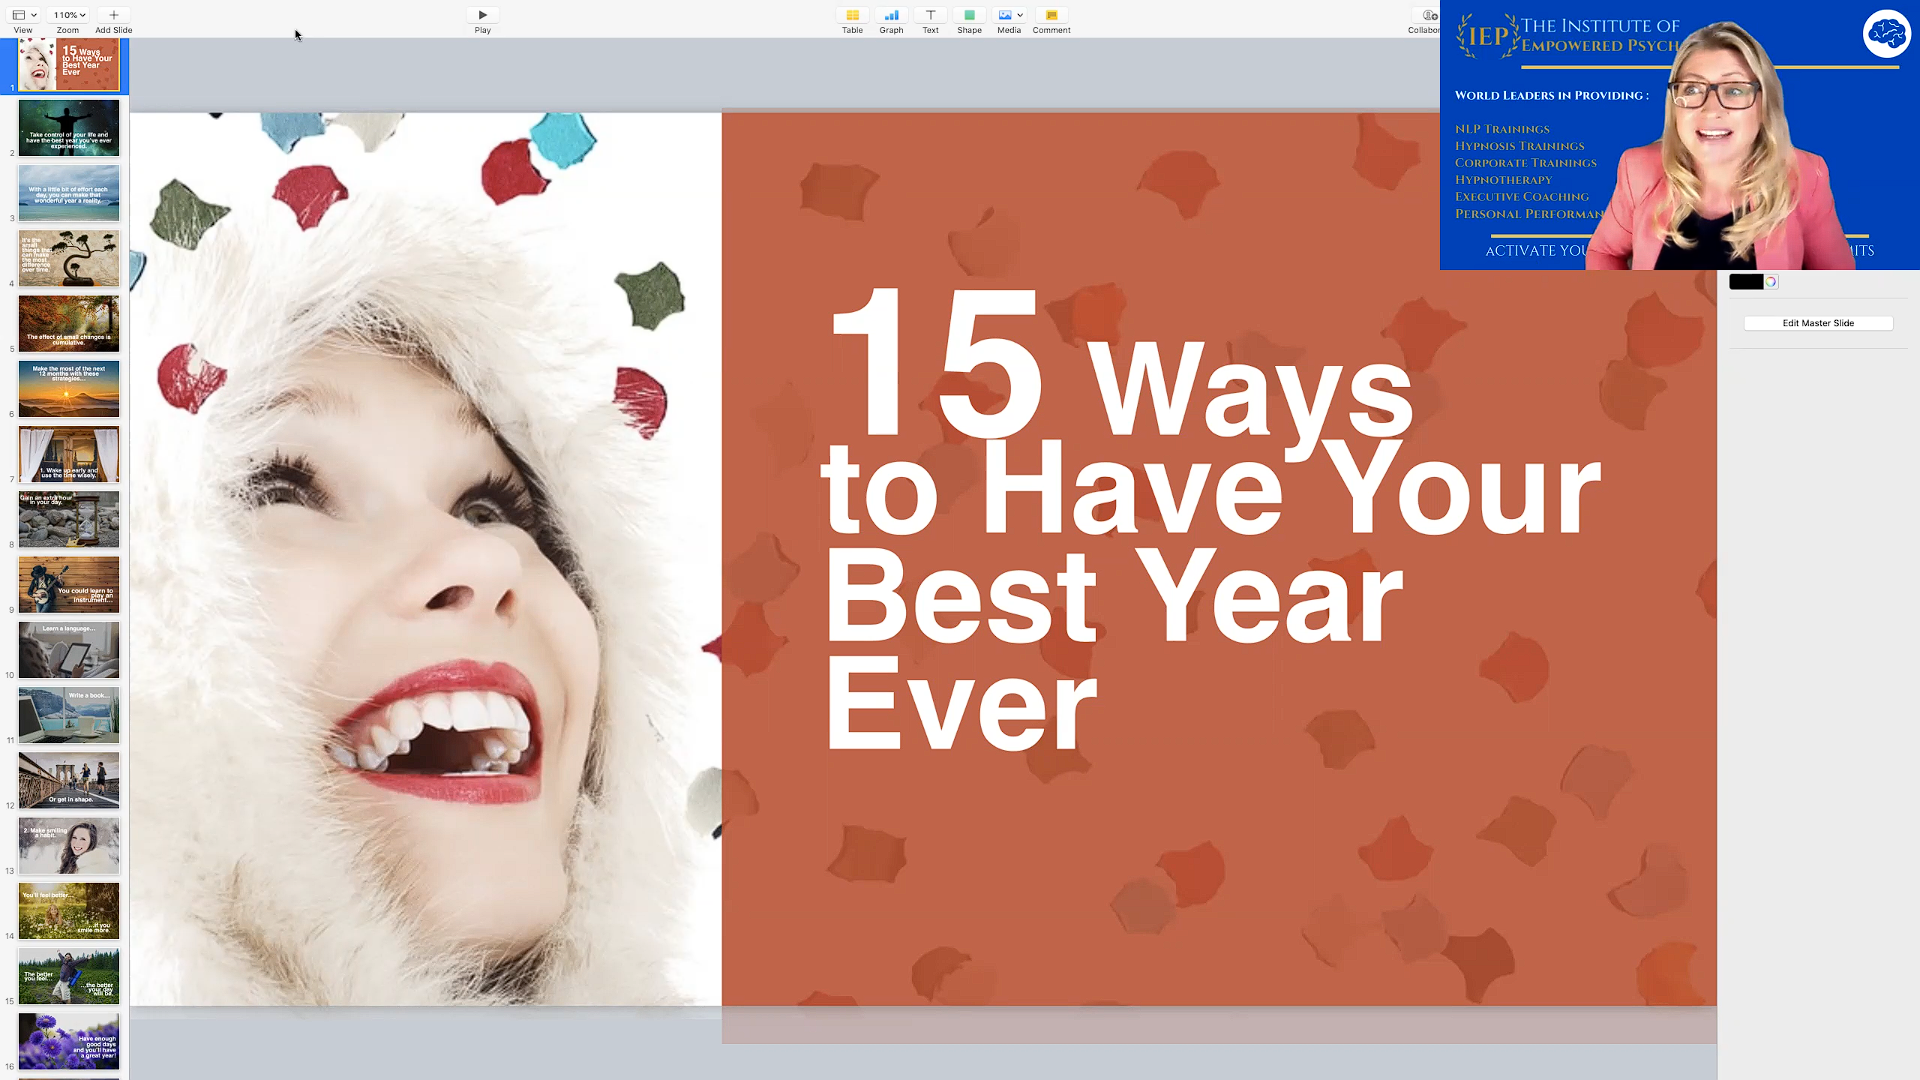 15 WAYS TO HAVE YOUR BEST YEAR EVER